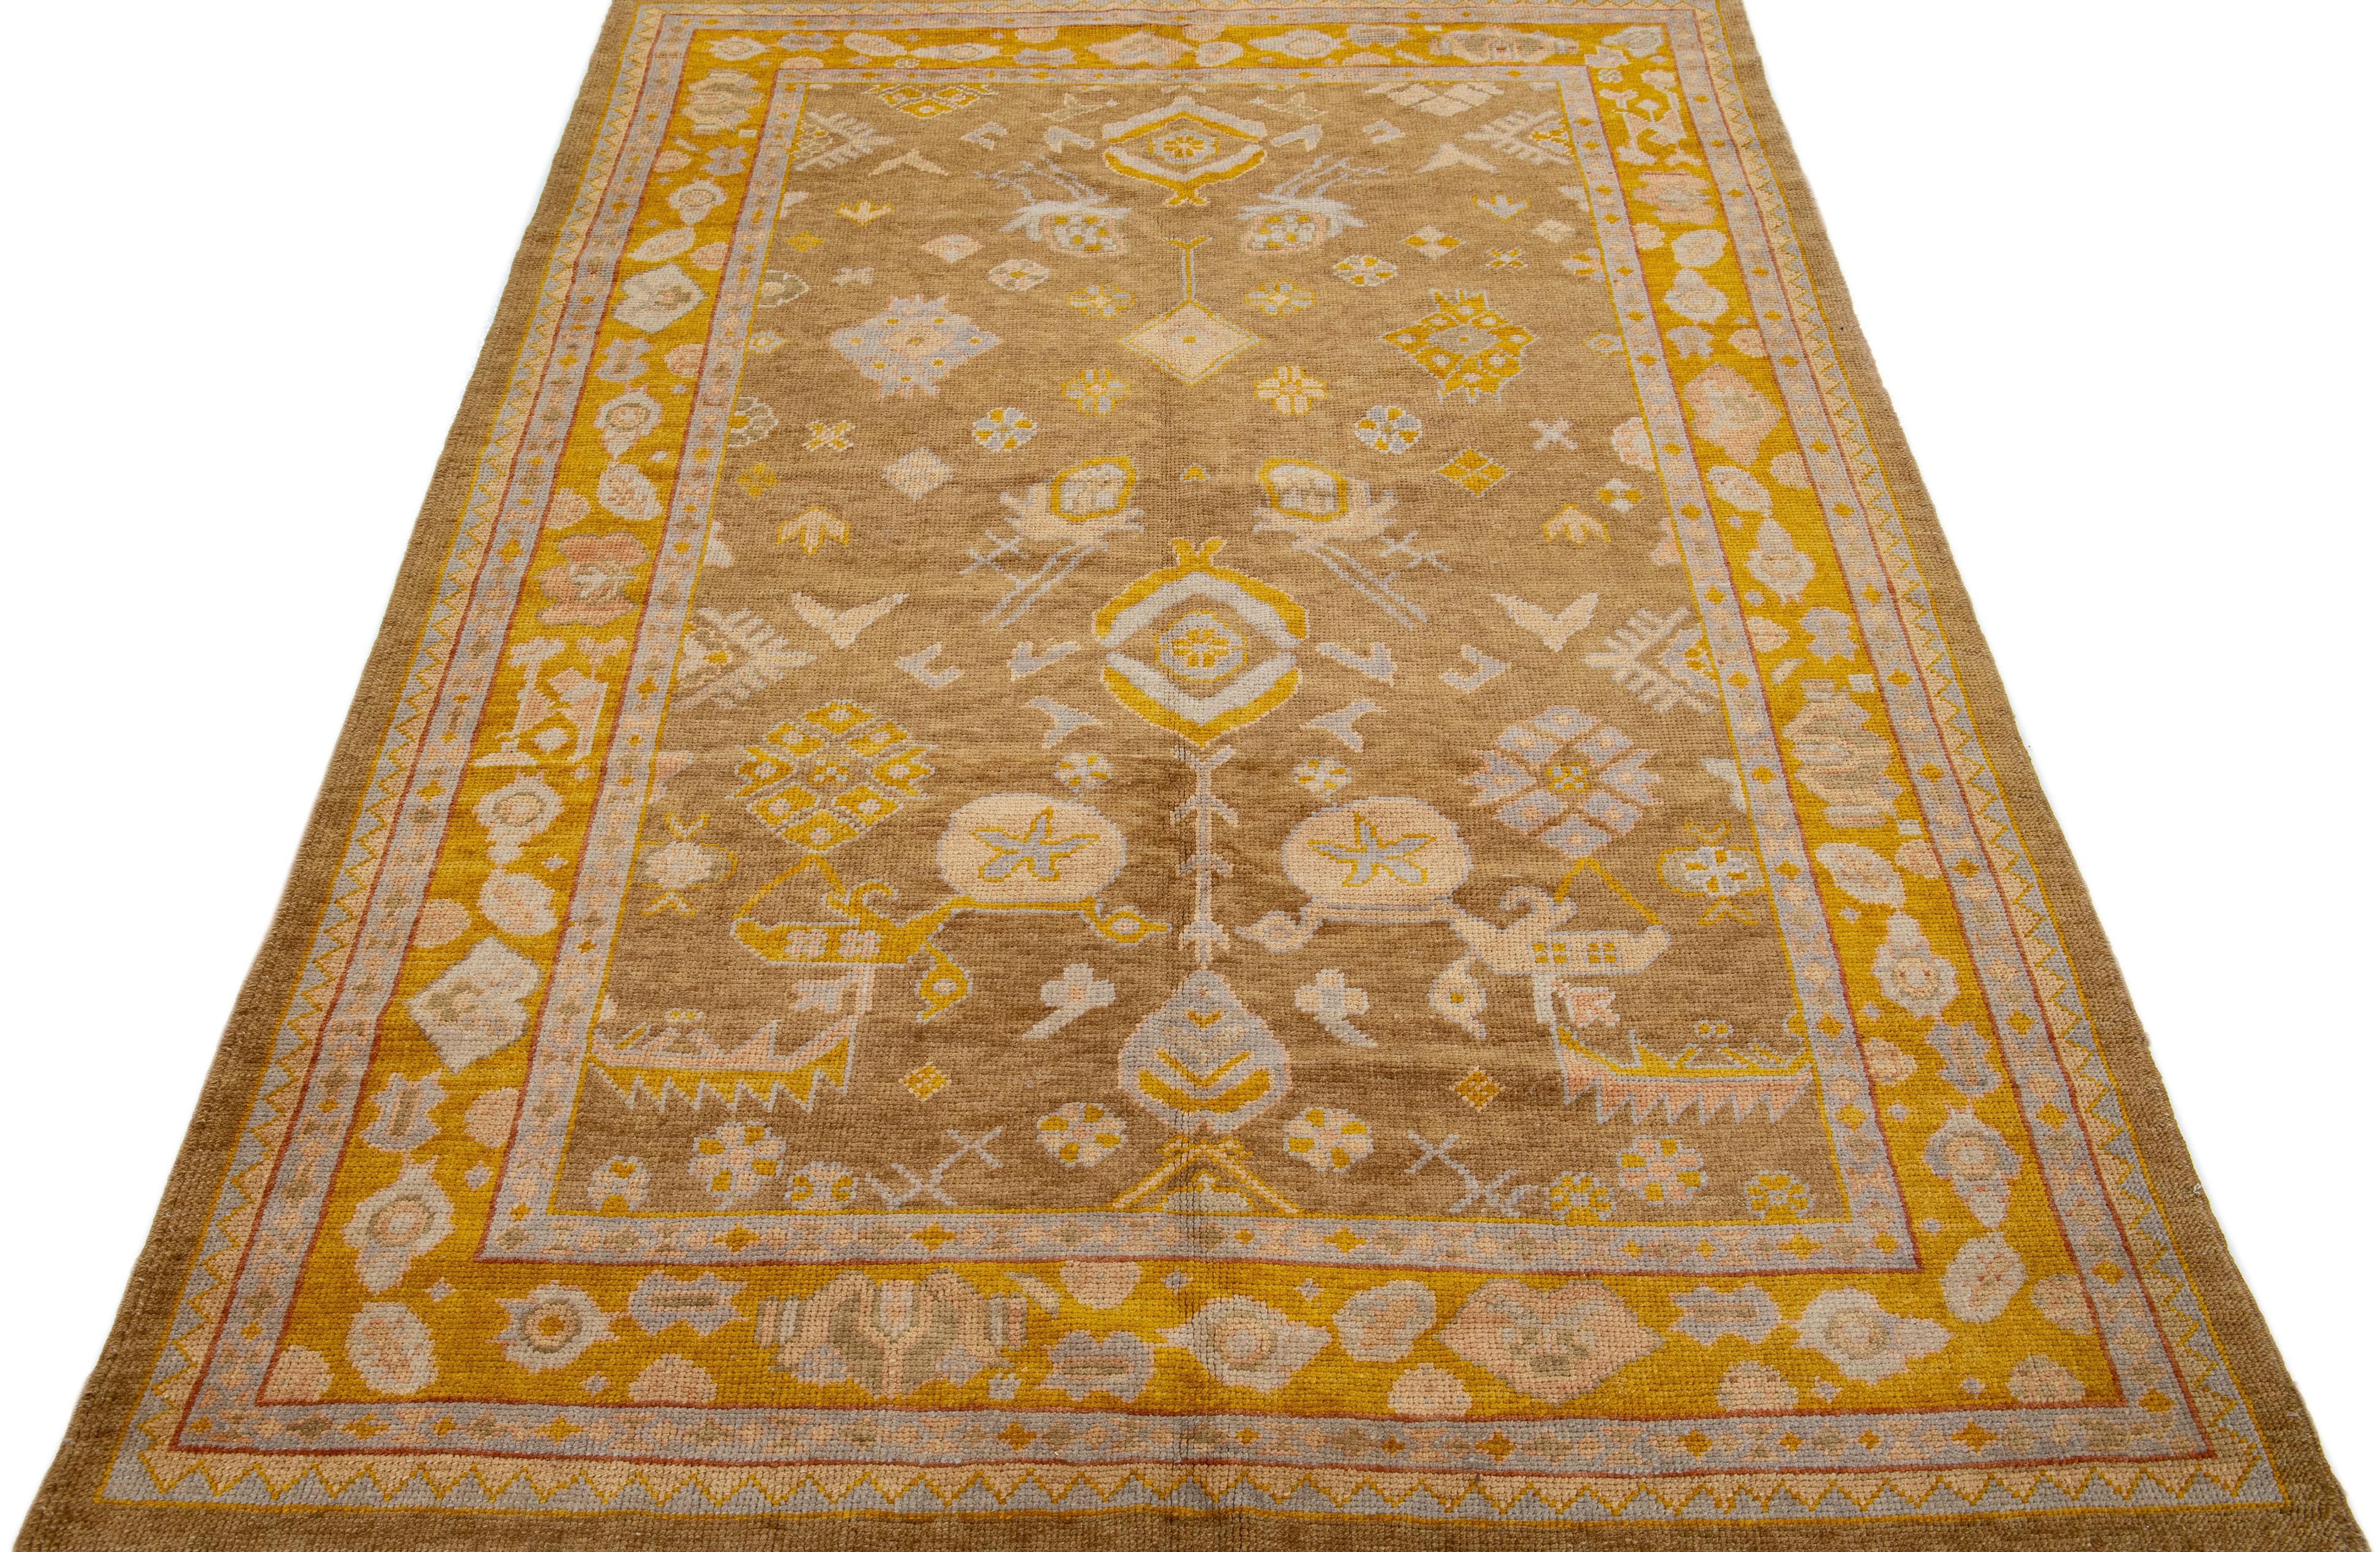 Beautiful Modern Turkish hand-knotted wool rug with a brown color field. This rug has a goldenrod-designed frame with accent colors of peach and gray in a gorgeous all-over geometric floral design.

This rug measures: 6'1